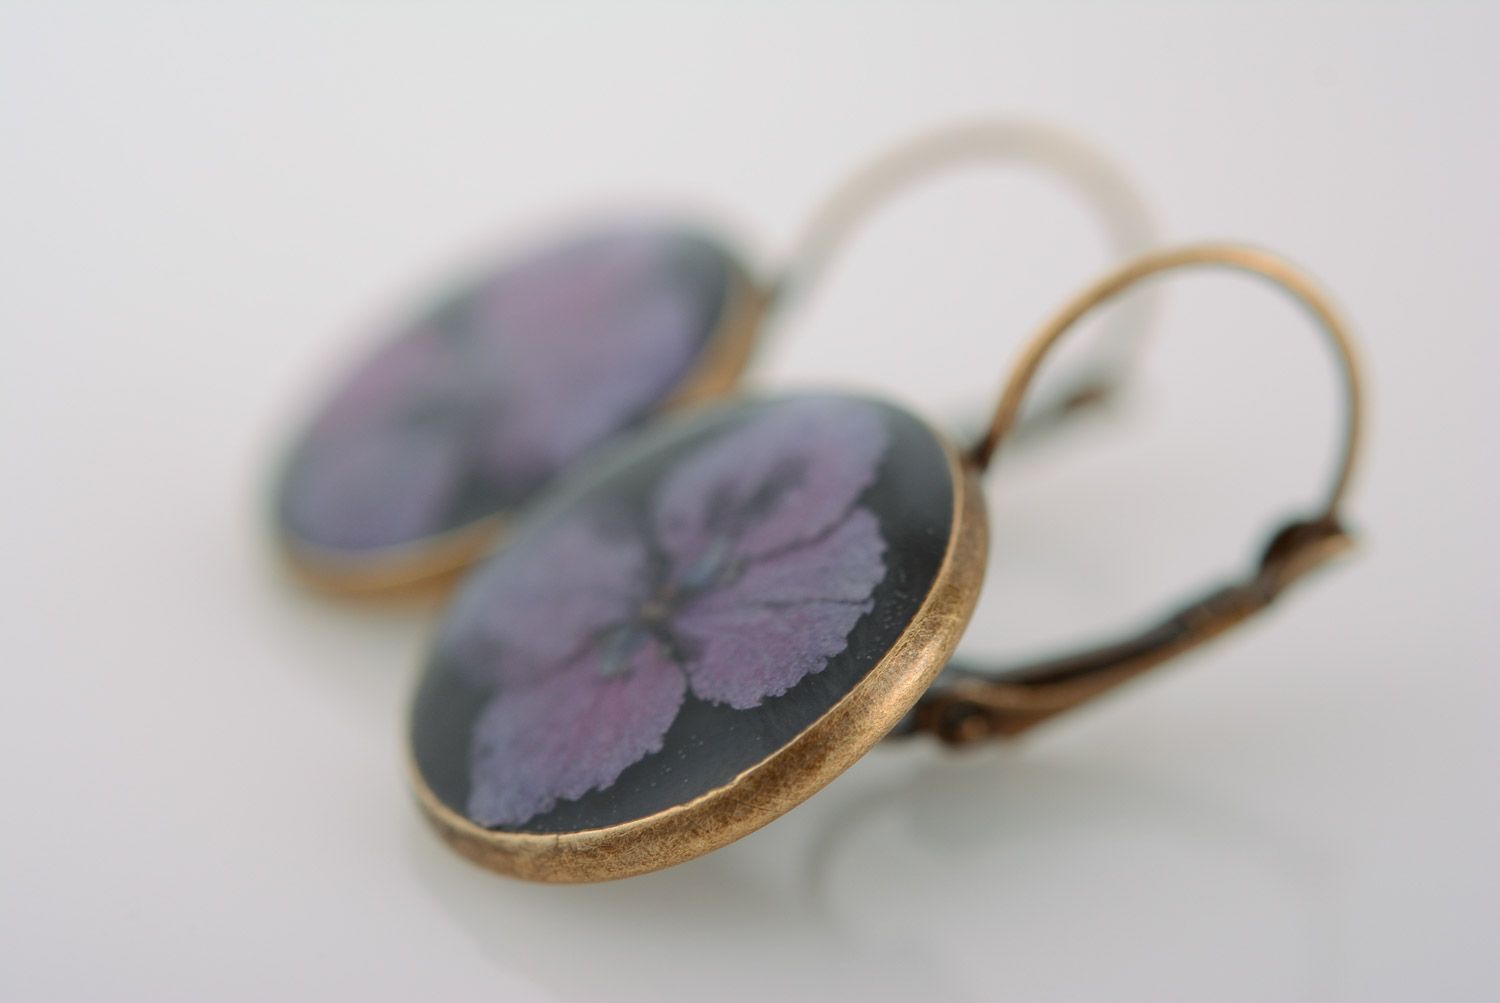 Homemade round black dangle earrings with violet flowers in epoxy resin photo 3